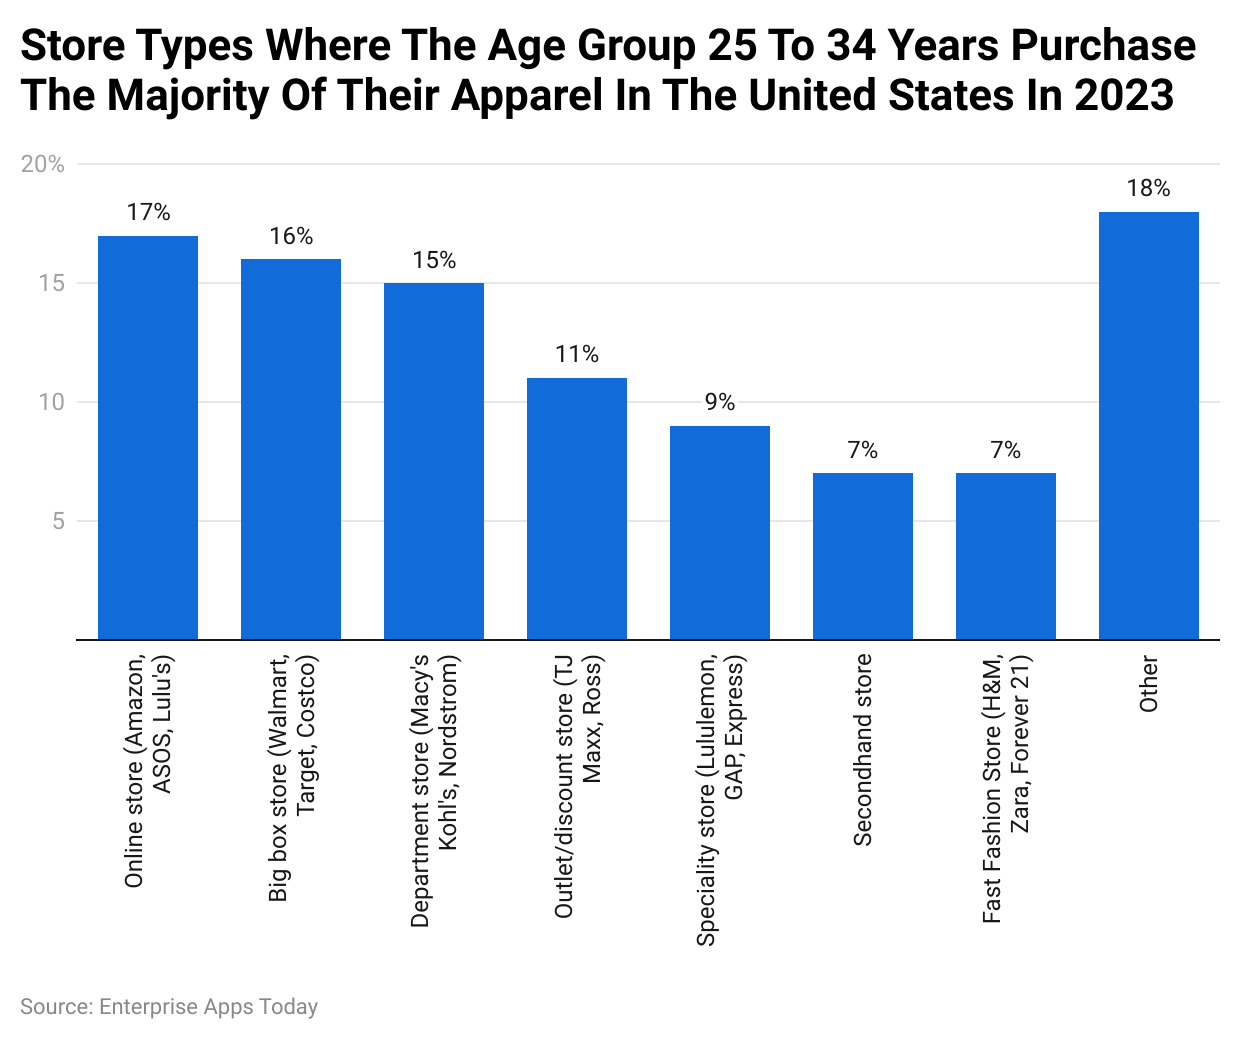 Store types where the age group 25 to 34 years purchase the majority of their apparel in the United States in 2023